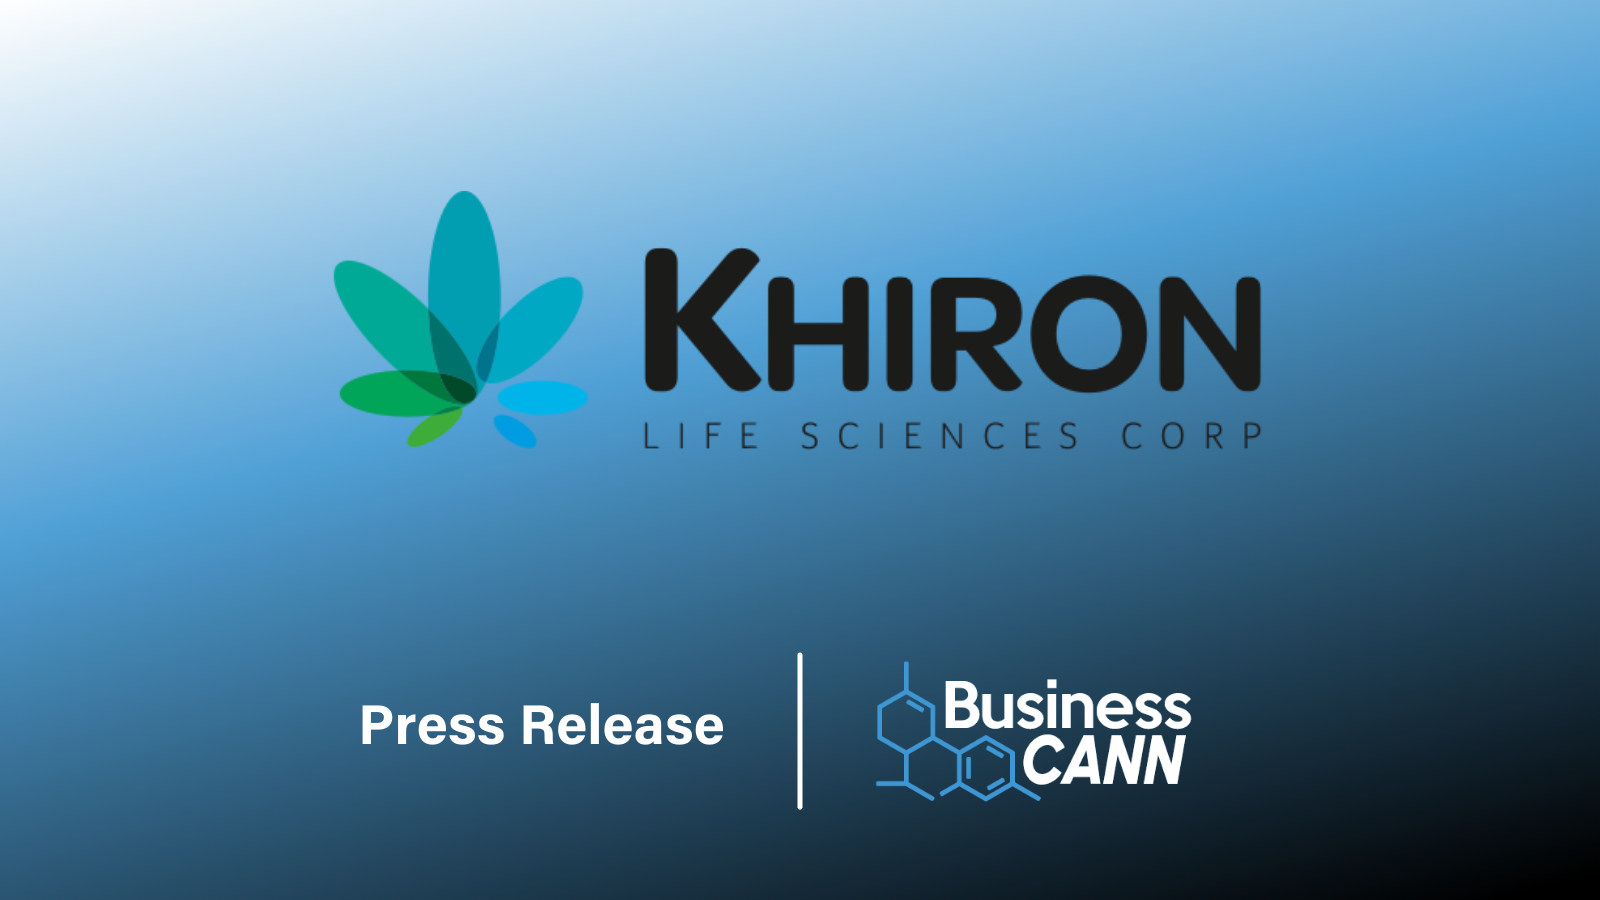 KHIRON Life Sciences continues to demonstrate its market dominance in the UK's medical cannabis industry with cannabis sales volume growth of 240% in Q1 2022 compared to the entire 2021 year.